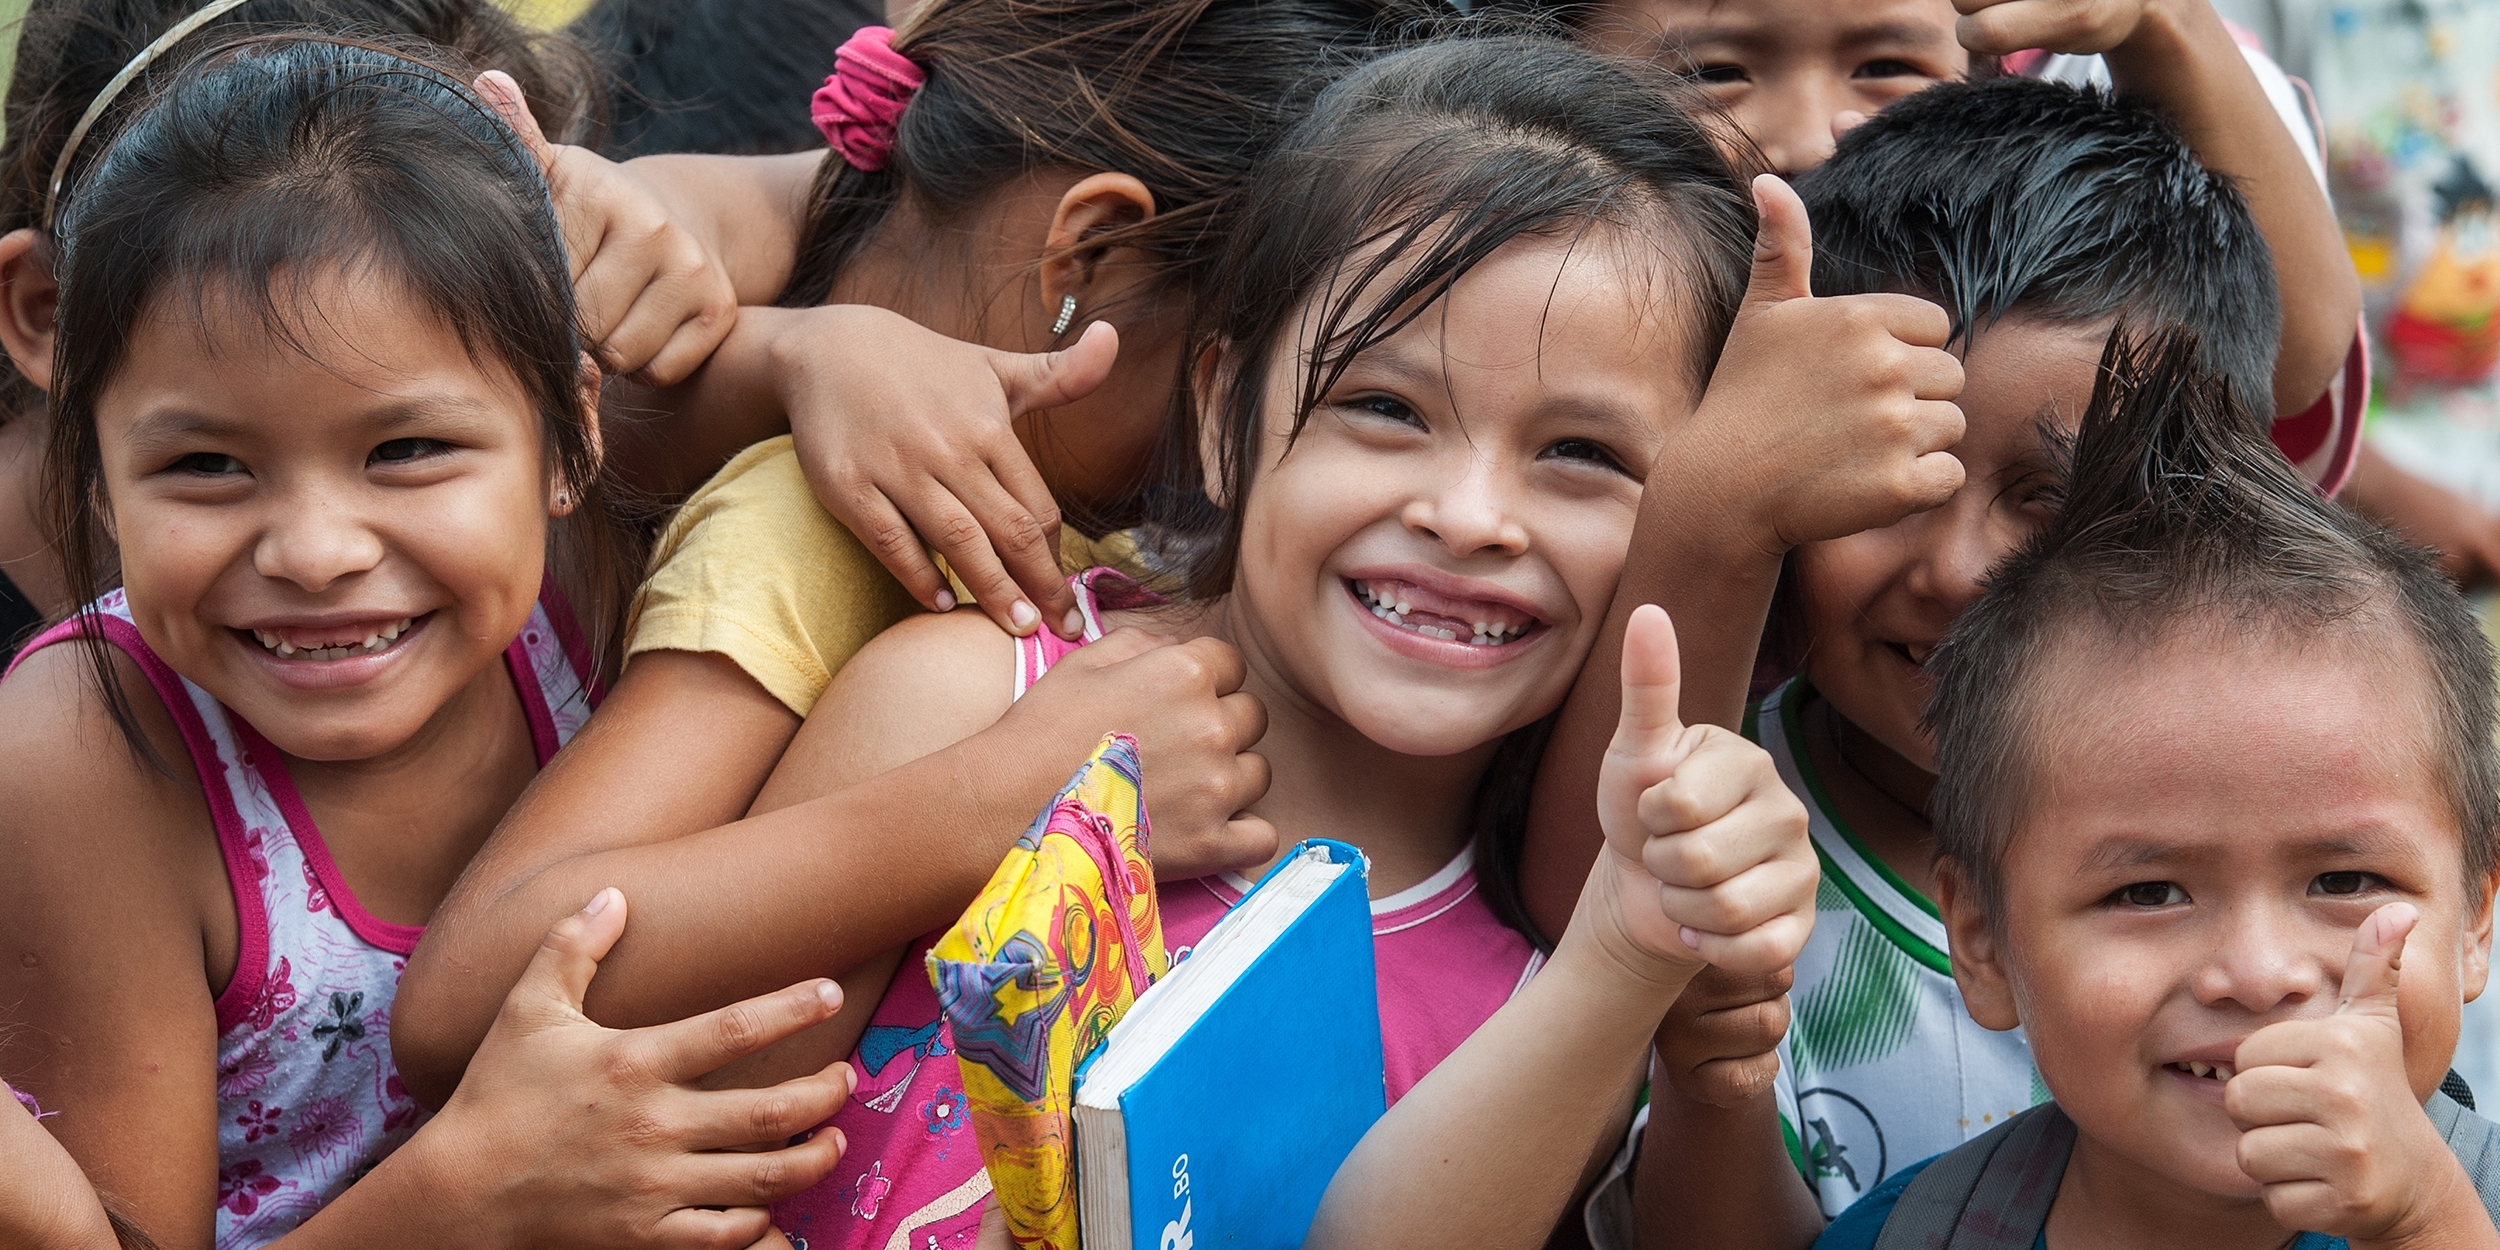 A group of smiling Bolivian children give a big “thumbs up” at an Early Childhood Development program in the village of San Ignacio de Mojos, Bolivia. There are 57 students in the school. Photo credit: Susan Warner/Save the Children, March 2016.